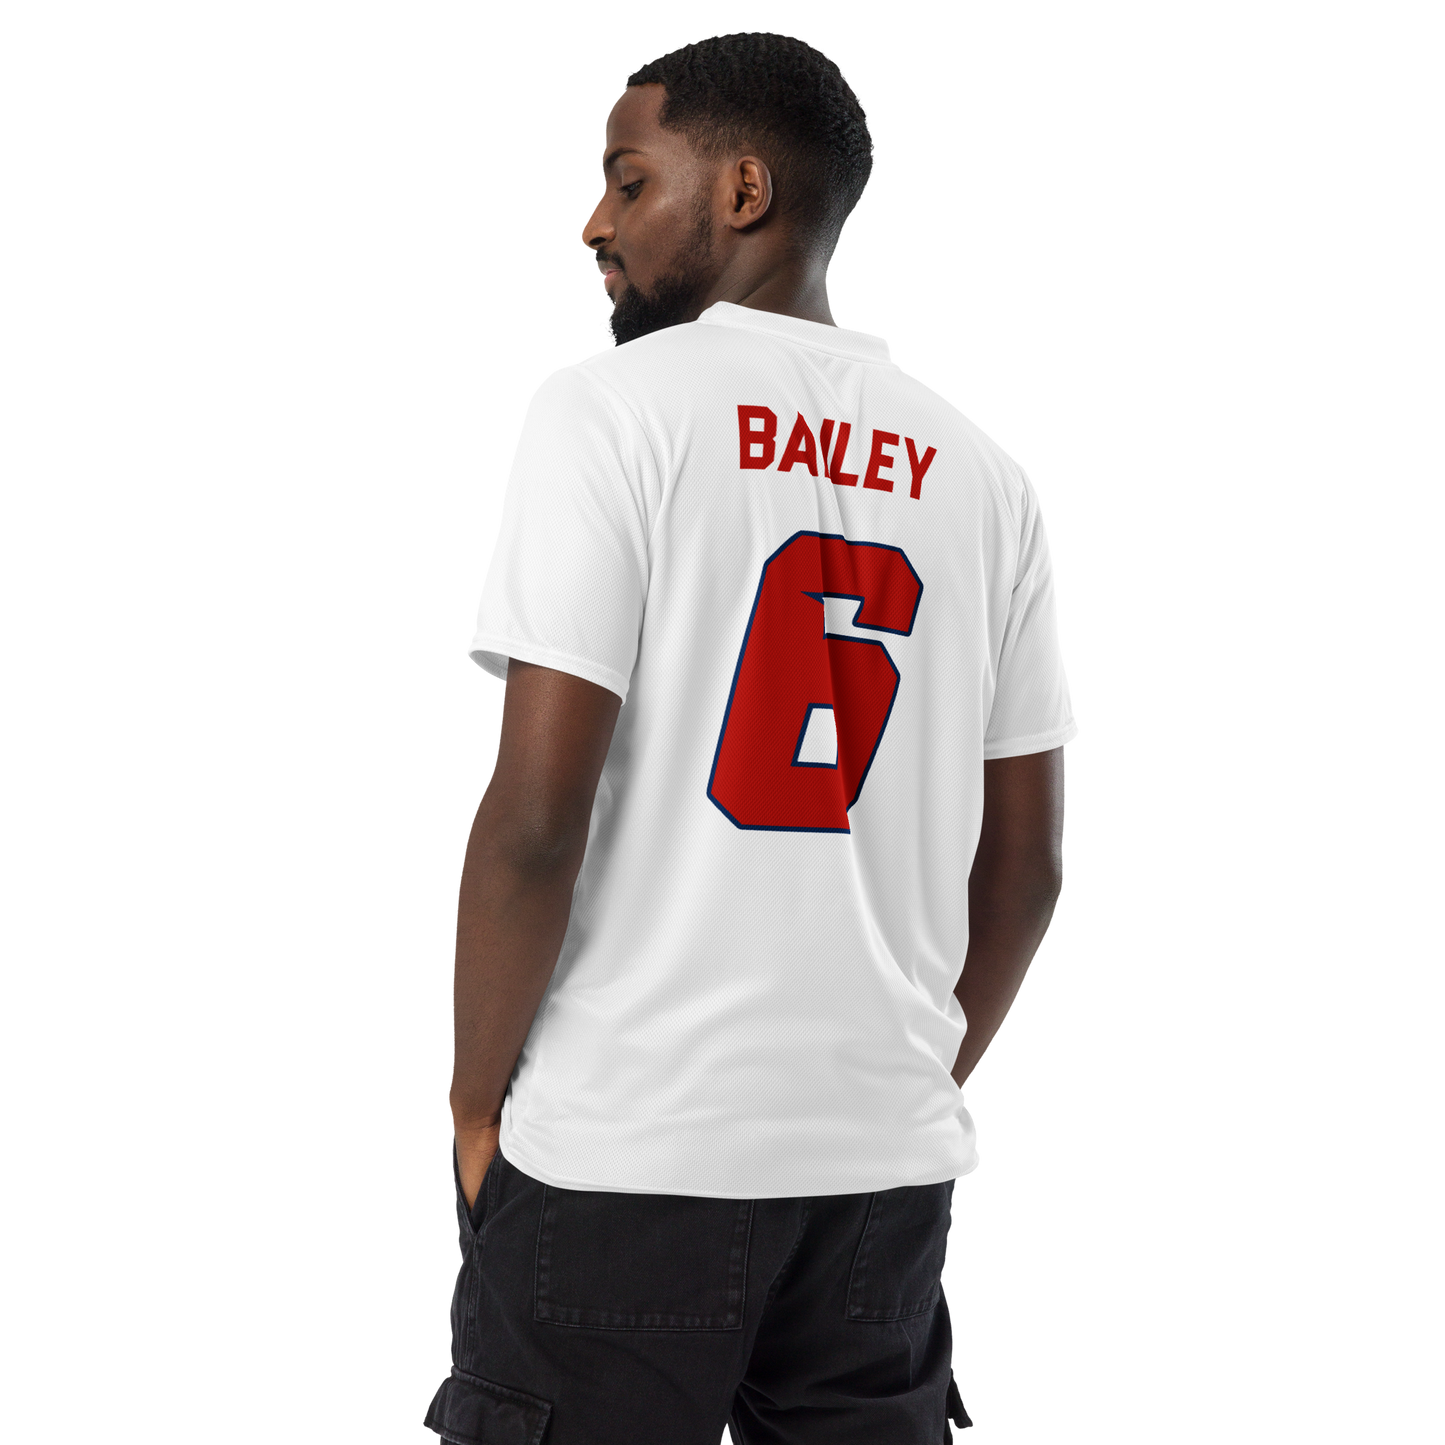 LEVELLE BAILEY AWAY SHIRTSY